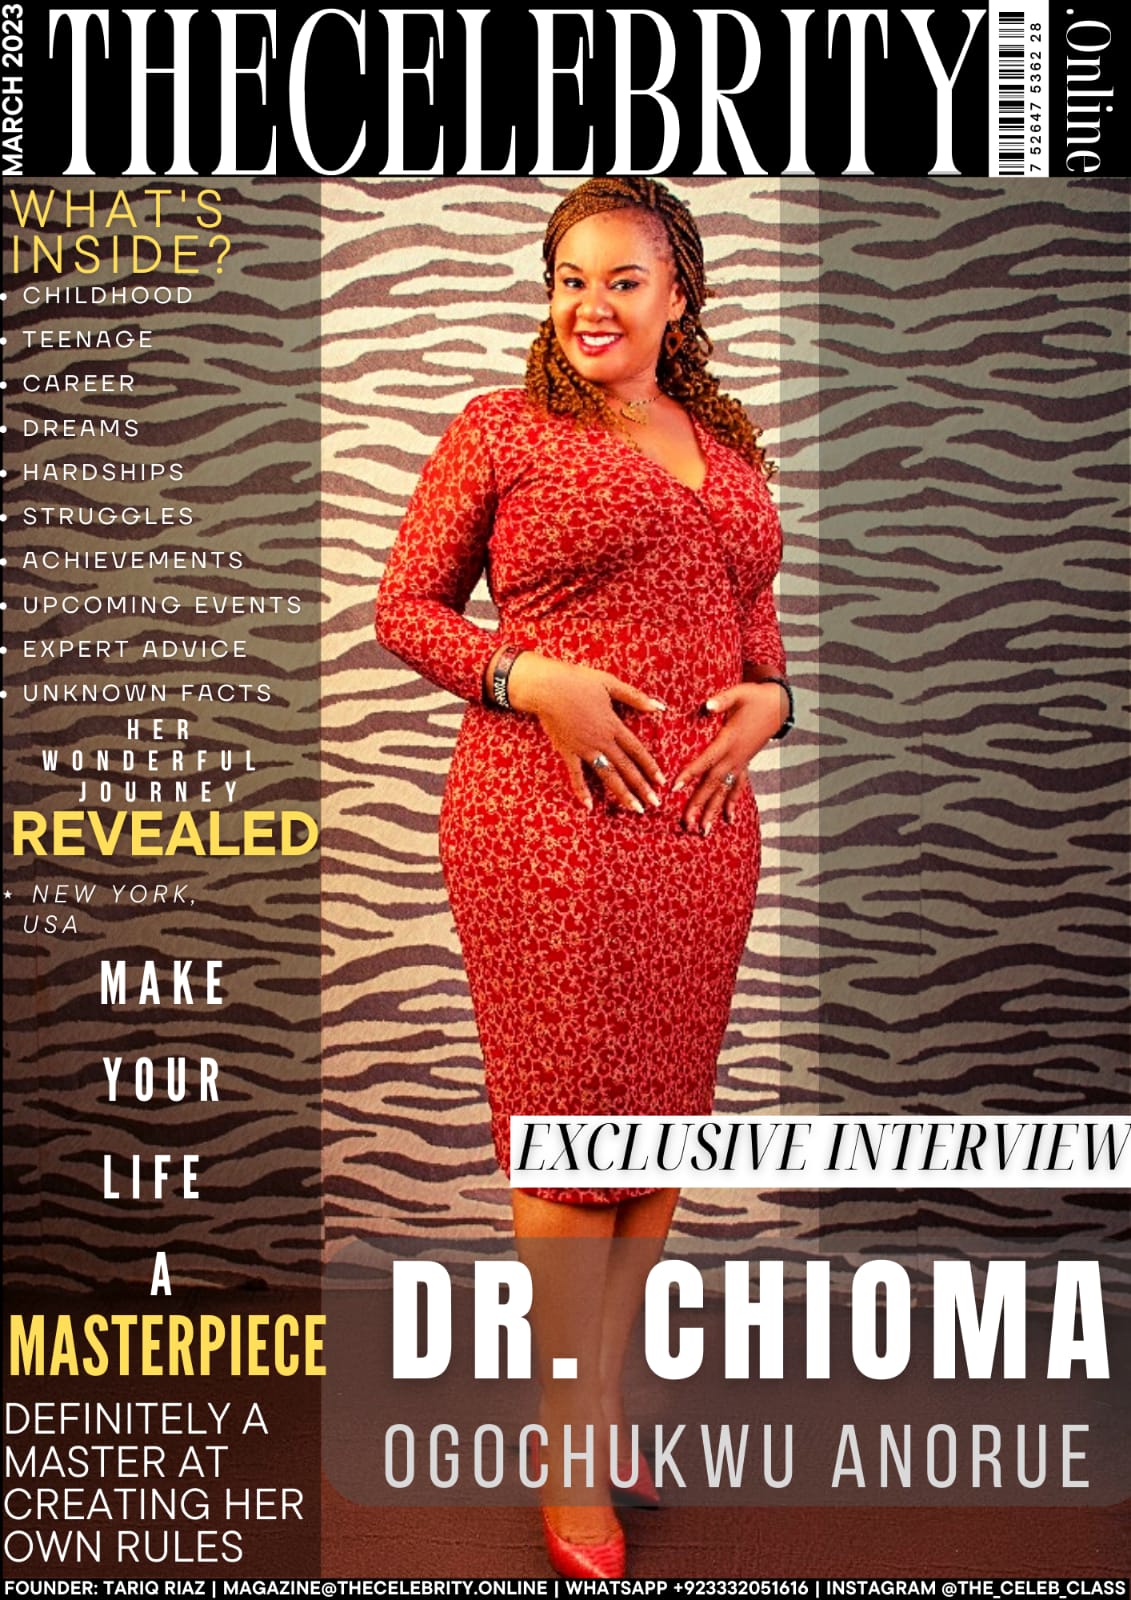 Dr. Chioma Ogochukwu Anorue Exclusive Interview – ‘I imagined, believed and took action’